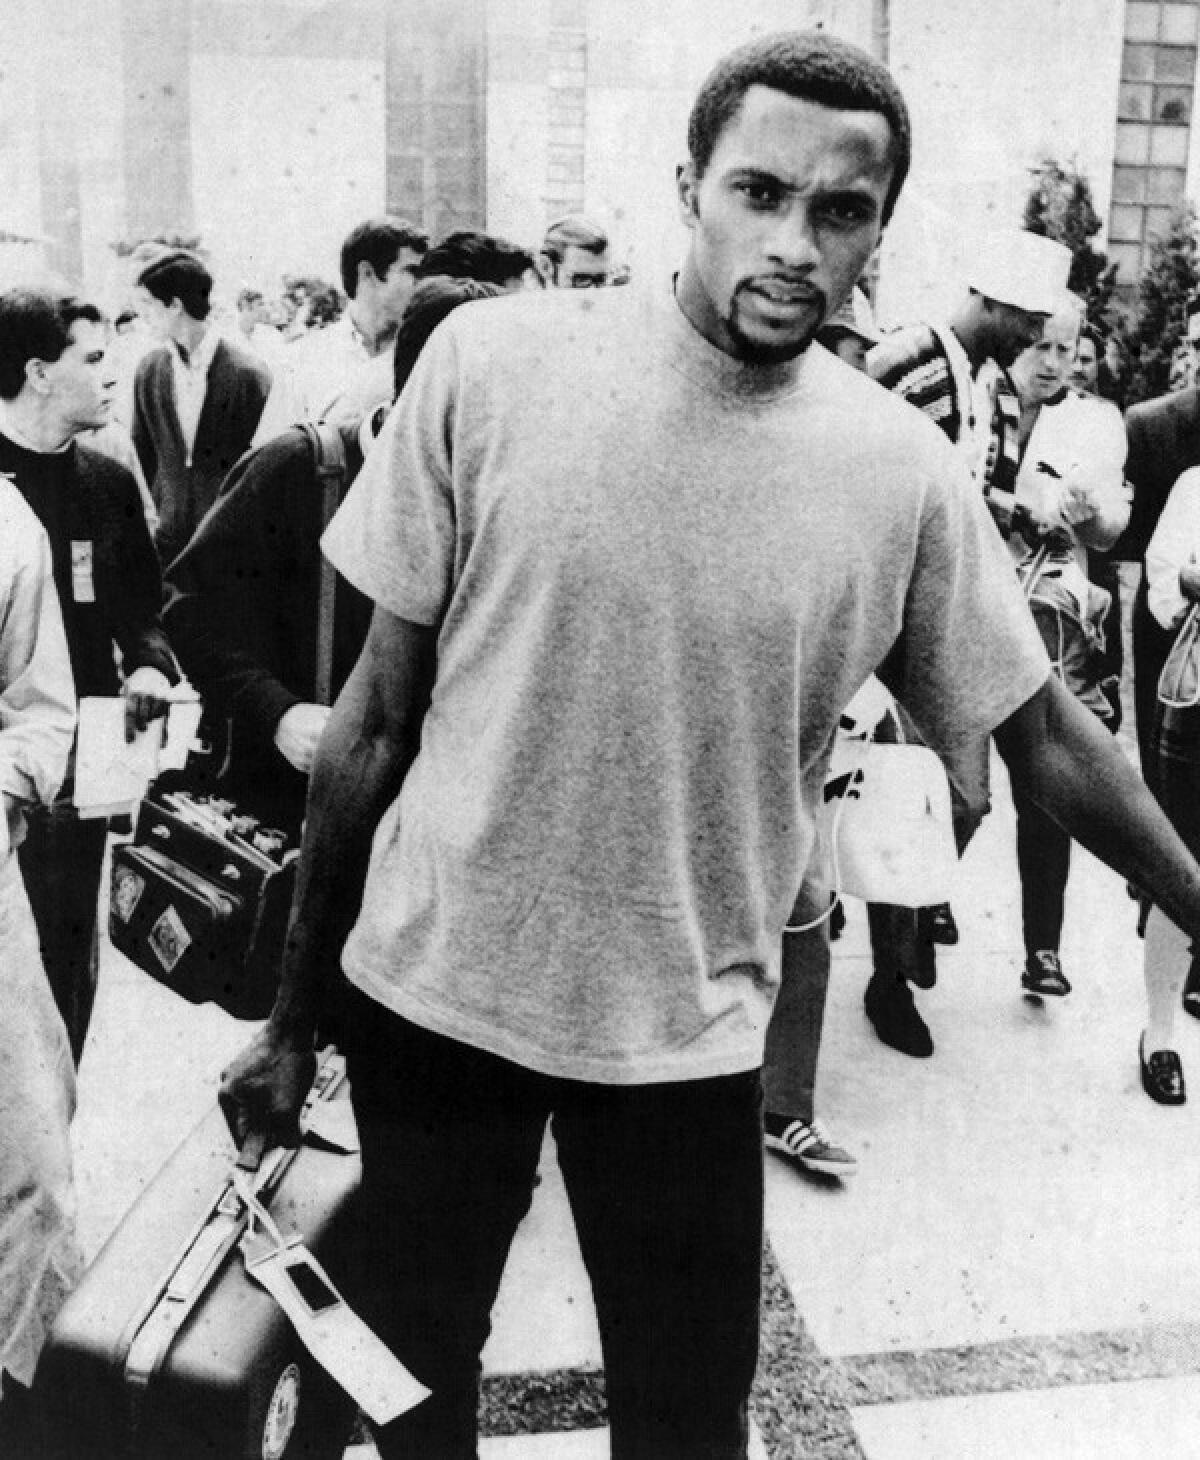 Tommie Smith carries a suitcase after being banned from the athletes village at the 1968 Olympics.